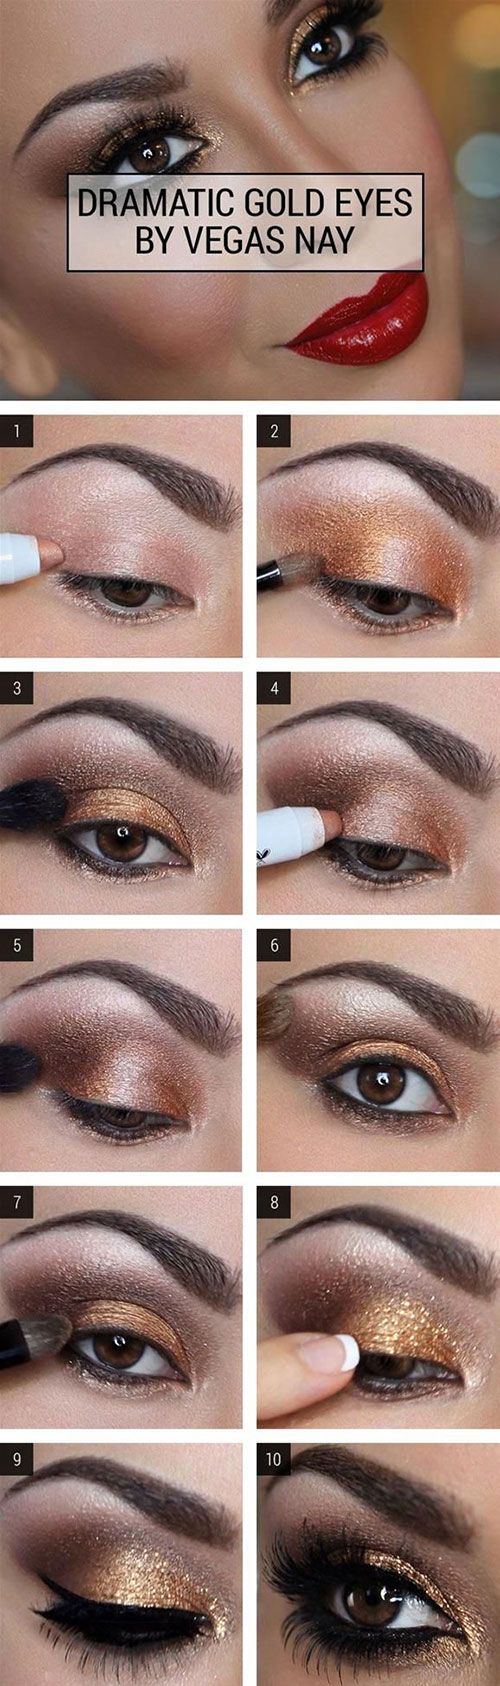 Smokey Eye Makeup For Blue Eyes How To Do Smokey Eye Makeup Top 10 Tutorial Pictures For 2019